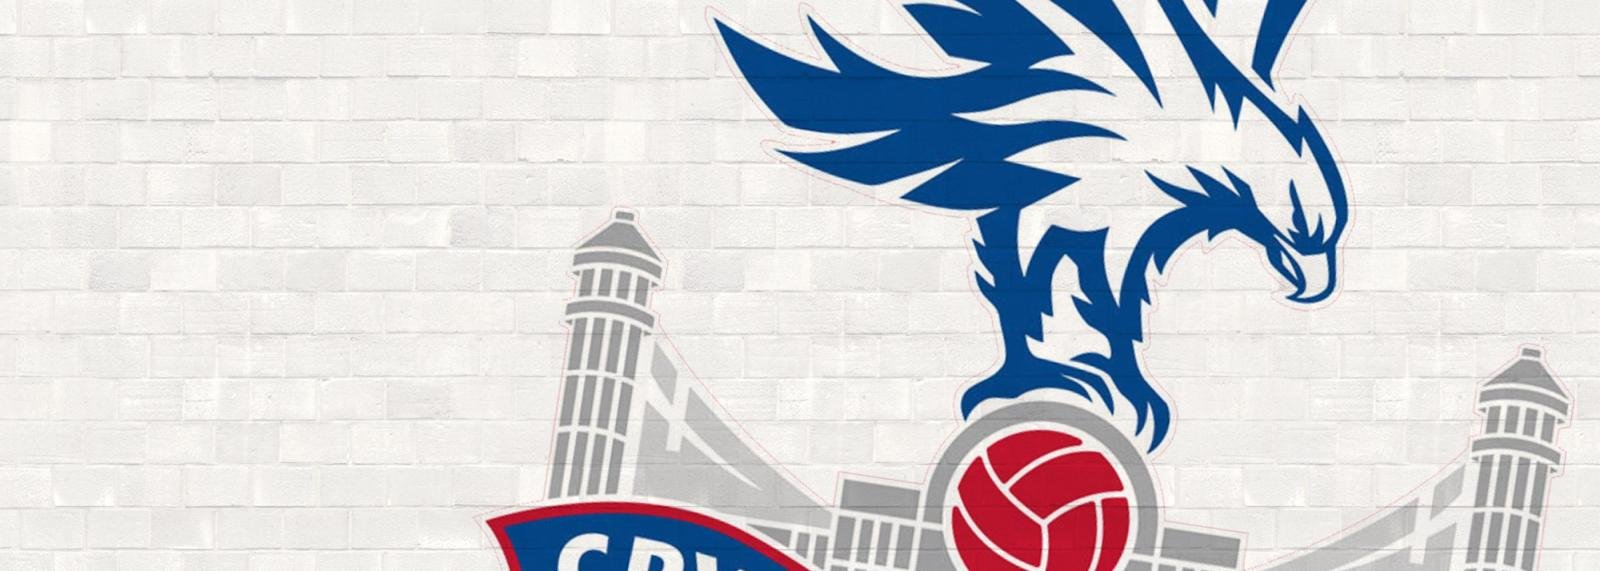 Crystal Palace welcome the international break as they bid to end woeful winless run